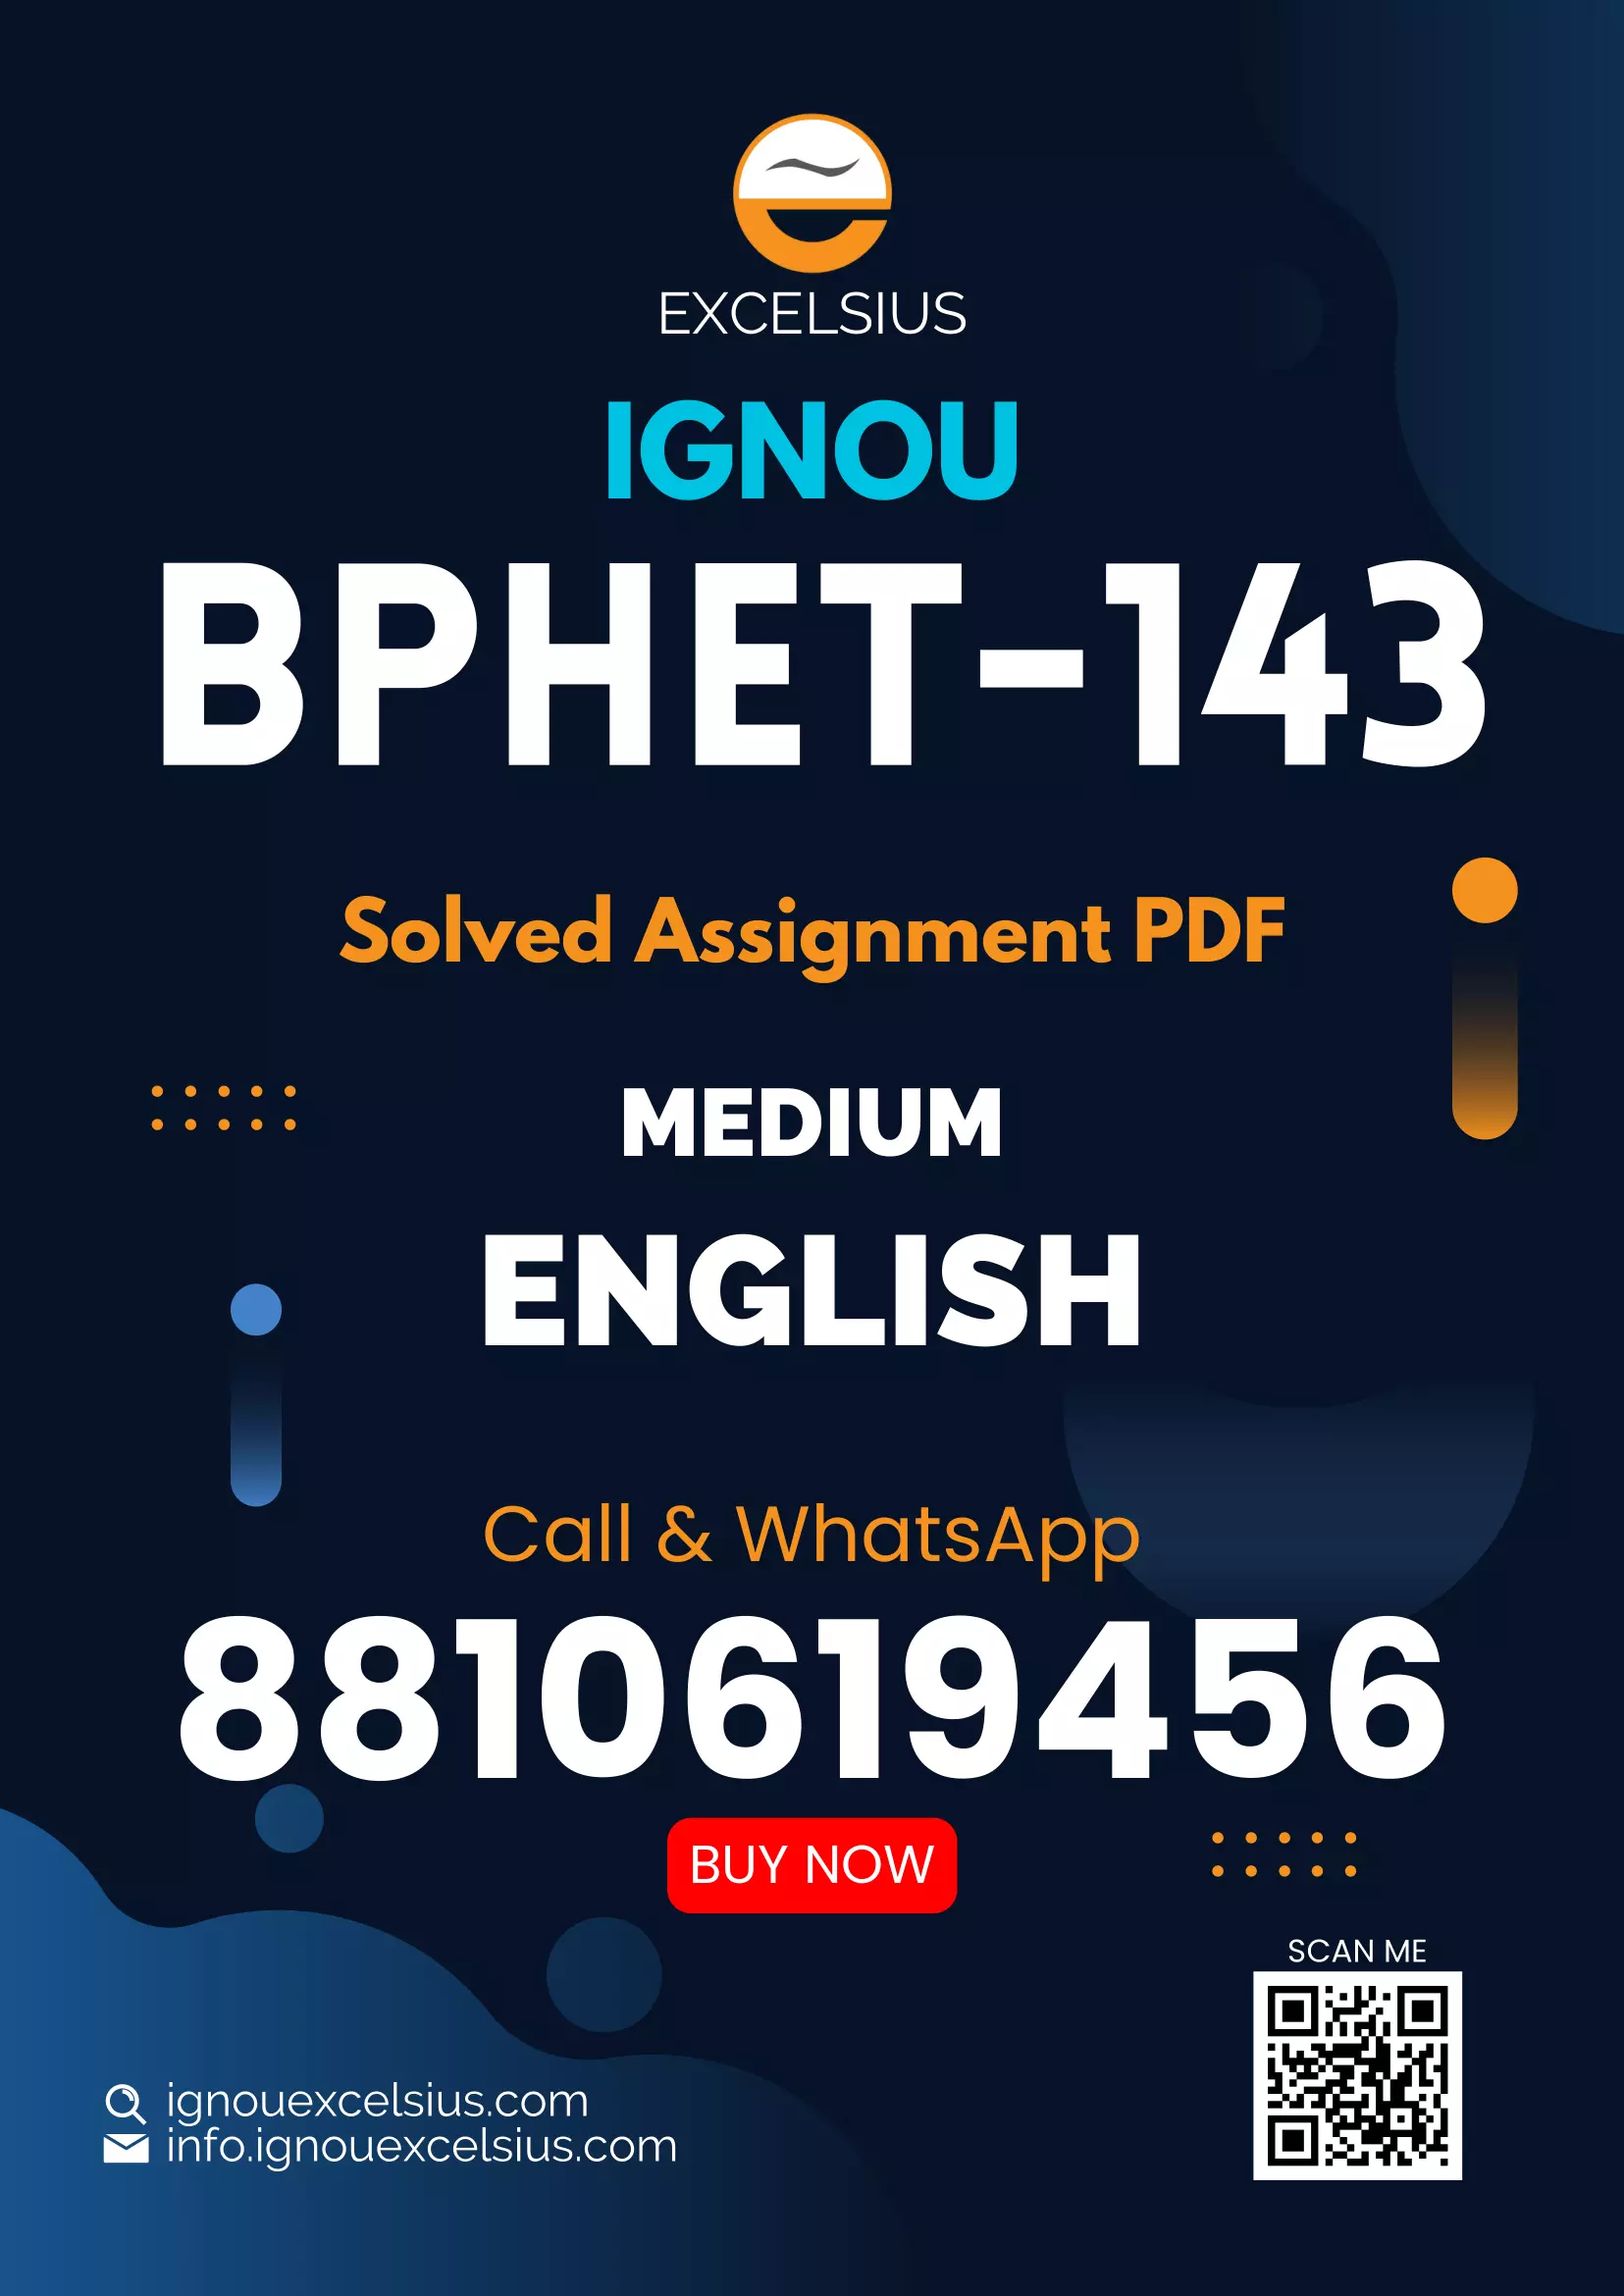 IGNOU BPHET-143 - Digital and Analog Circuits and Instrumentation Latest Solved Assignment-January 2023 - December 2023